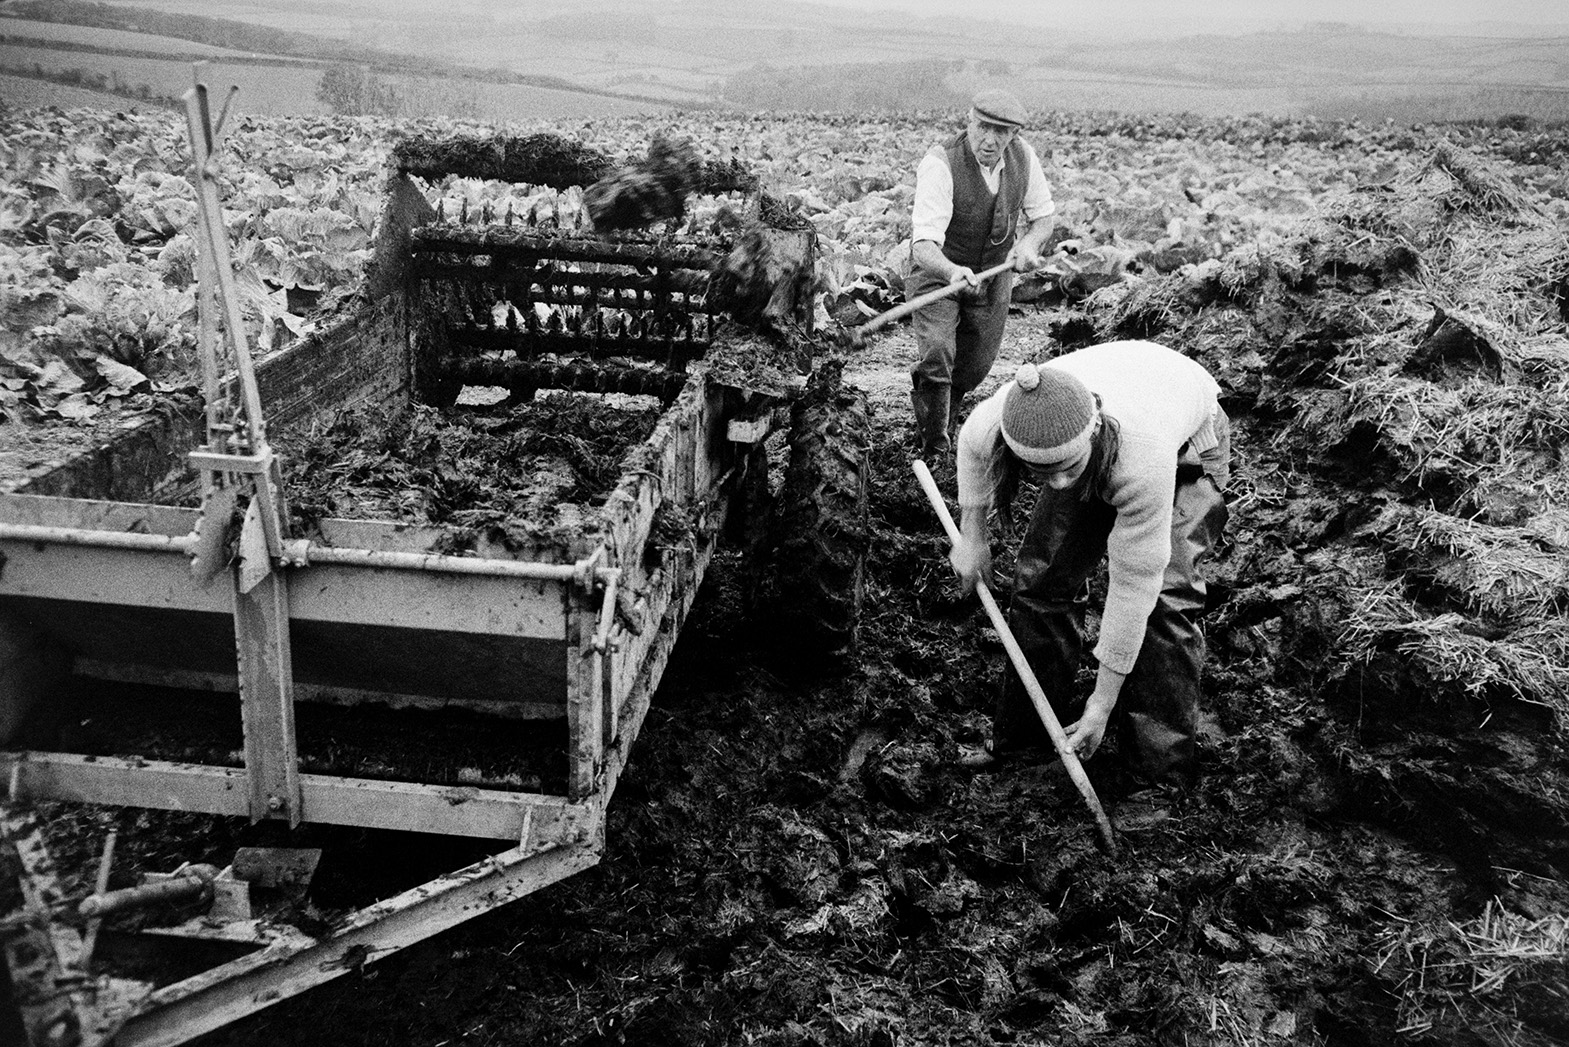 Derek Bright, in the foreground, helping Tom Hooper load a muck spreader with manure from a muck heap or dung heap, in a field at Mill Road Farm, Beaford. They are using shovels. The farm was also known as Jeffrys.